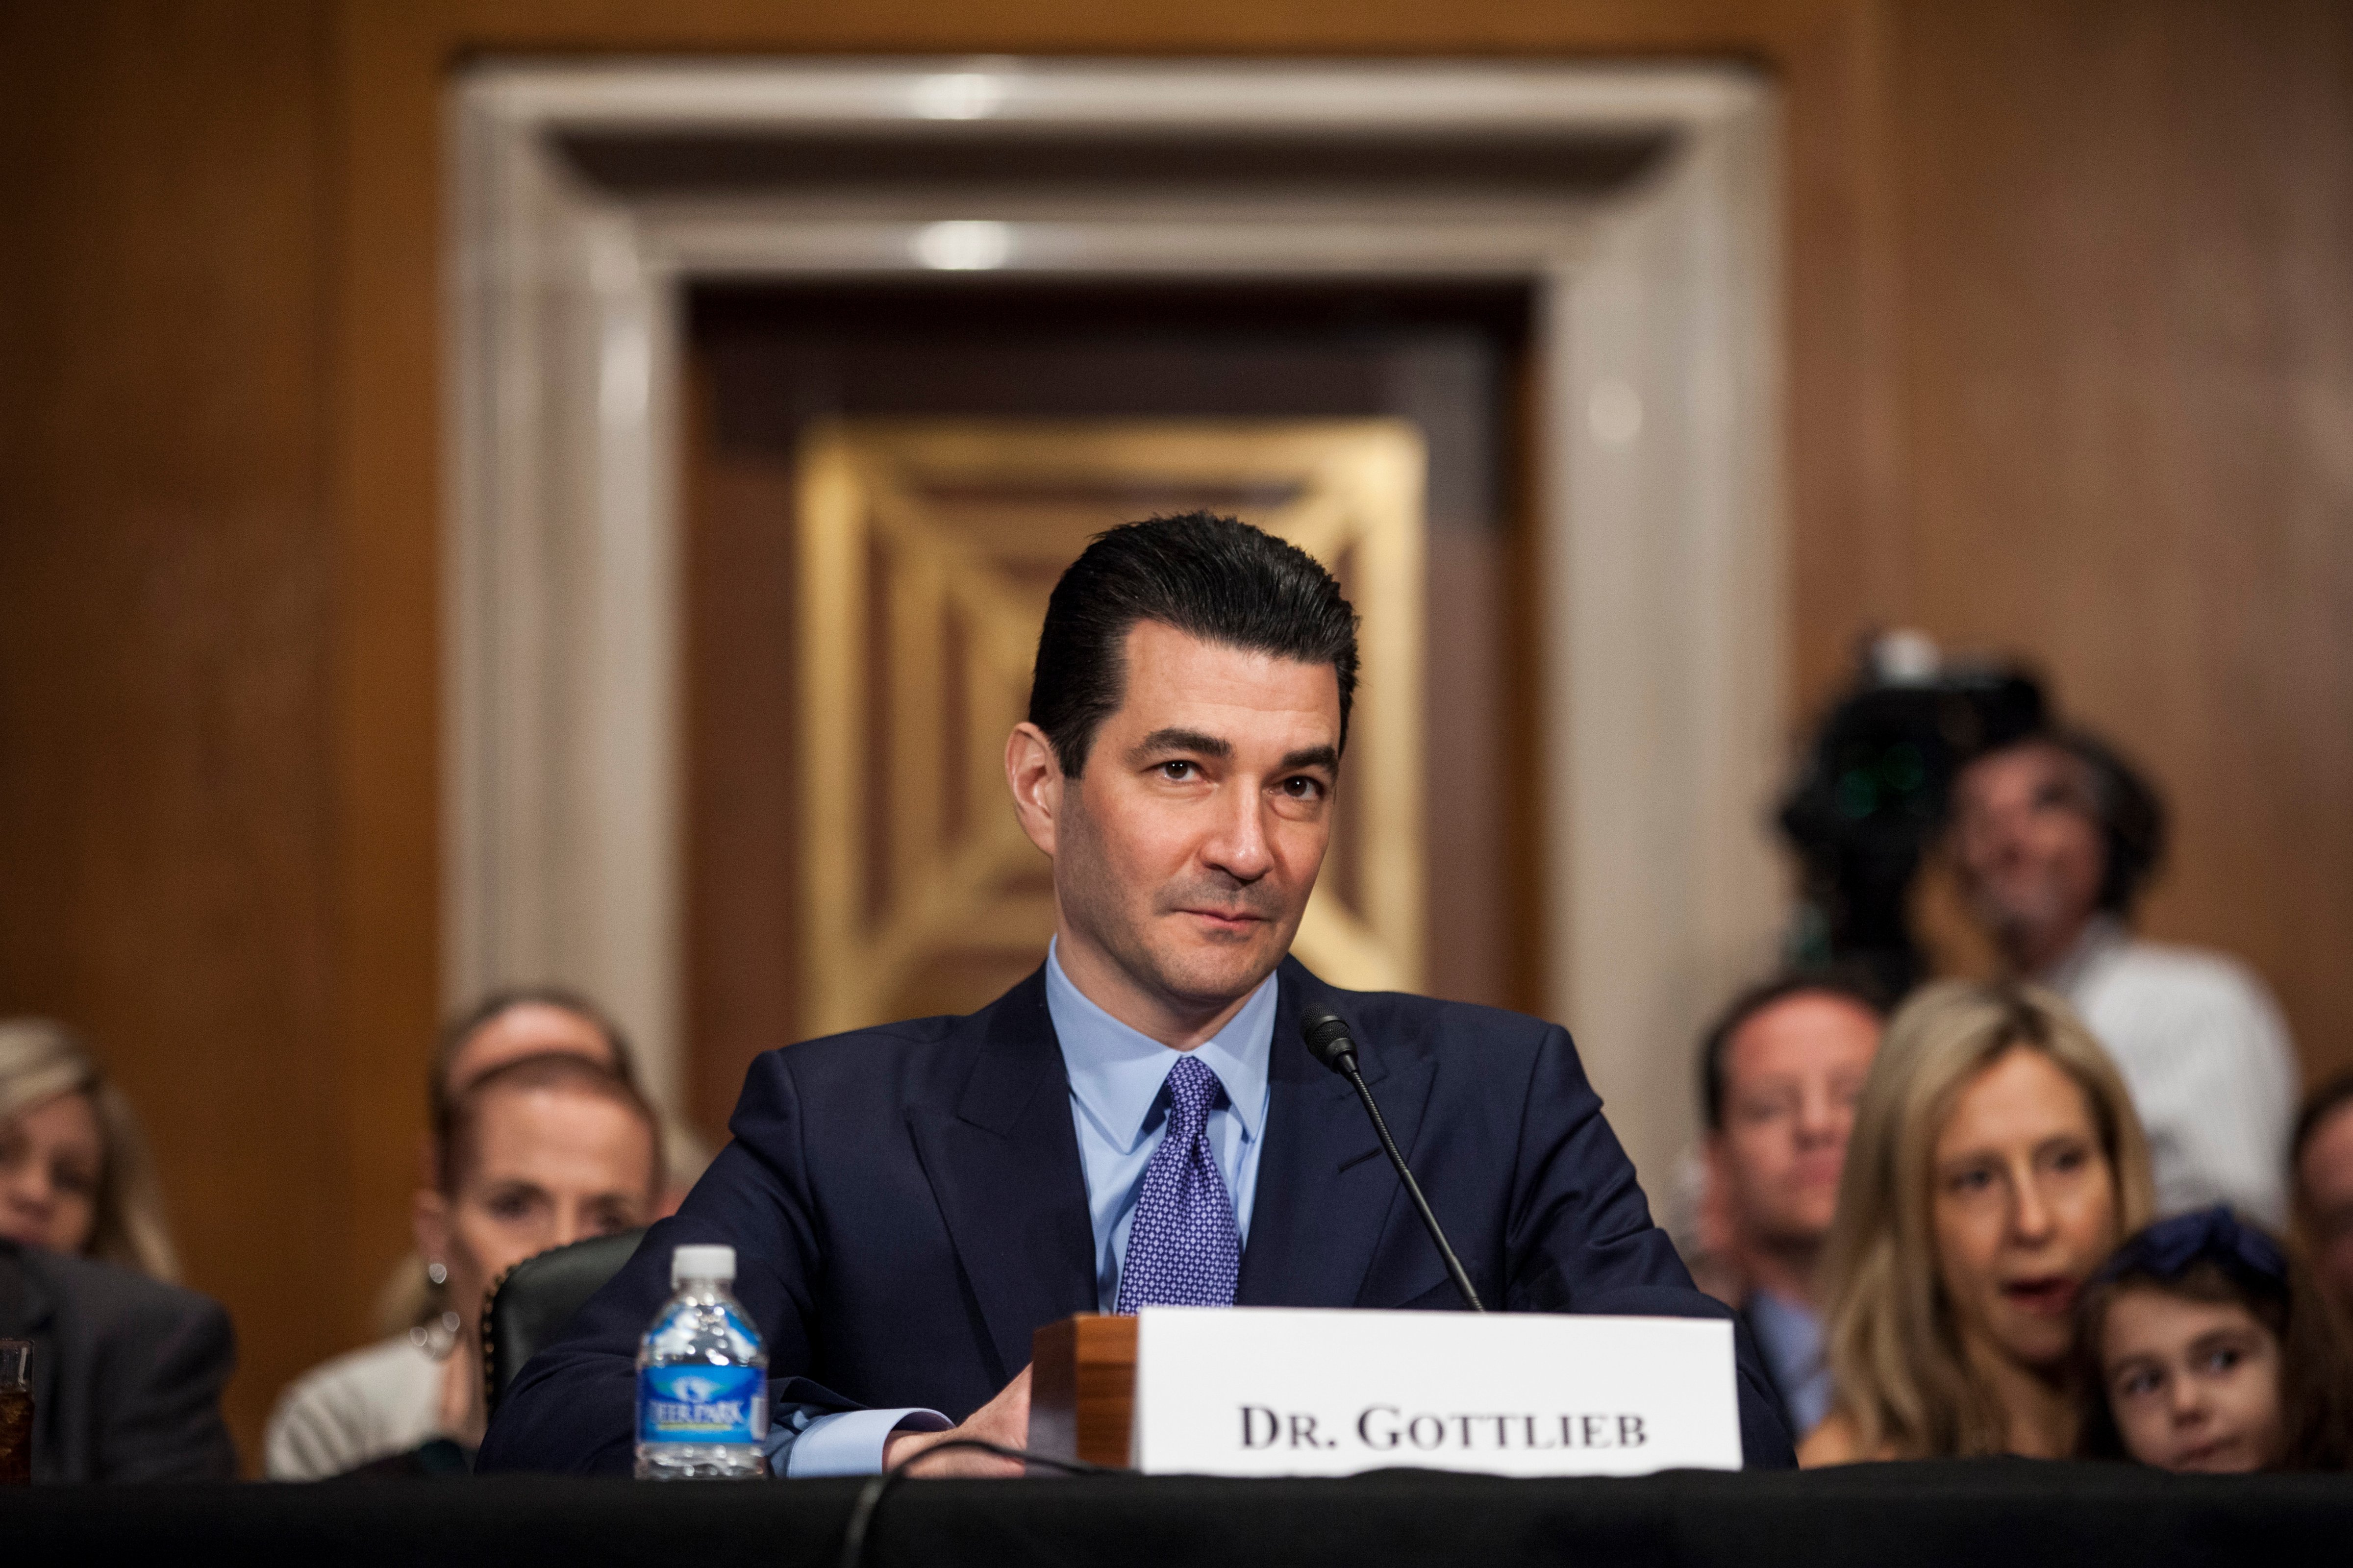 FDA Commissioner-designate Scott Gottlieb testifies during a Senate Health, Education, Labor and Pensions Committee hearing on April 5, 2017 at on Capitol Hill in Washington, D.C. (Zach Gibson&mdash;Getty Images)